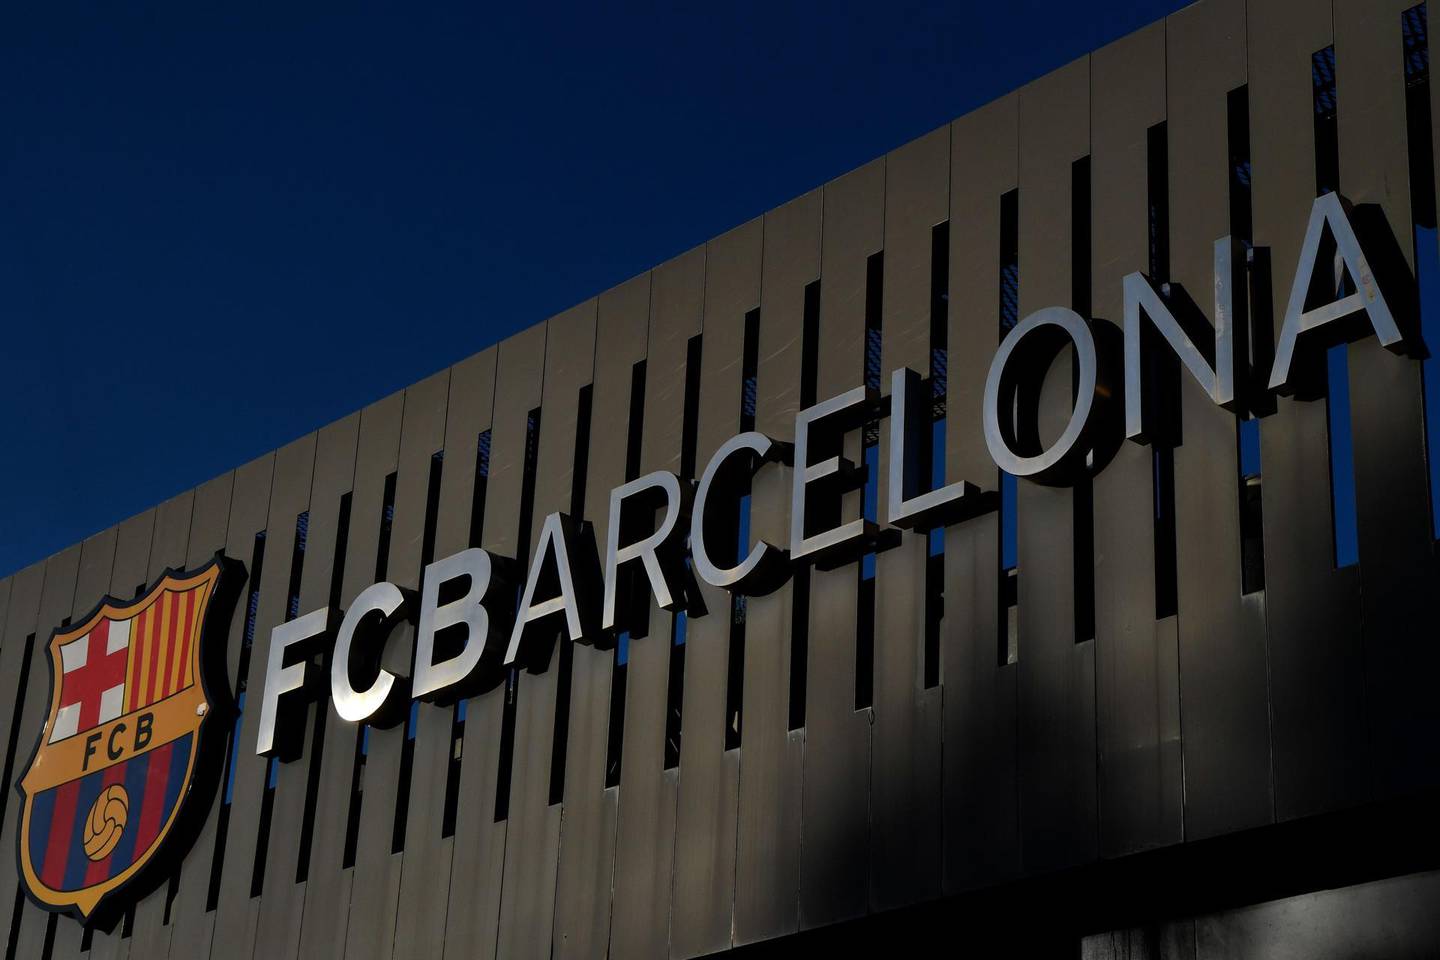 Picture shows a exterior view of the Camp Nou stadium in Barcelona on September 4, 2020. Lionel Messi confirmed today he will stay at Barcelona, insisting he could never go to court against "the club of his life". Messi released a statement at 6pm CET, saying "I would never go to court against Barca because it is the club that I love, that gave me everything since I arrived, it is the club of my life, I have made my life here." / AFP / Pau BARRENA
